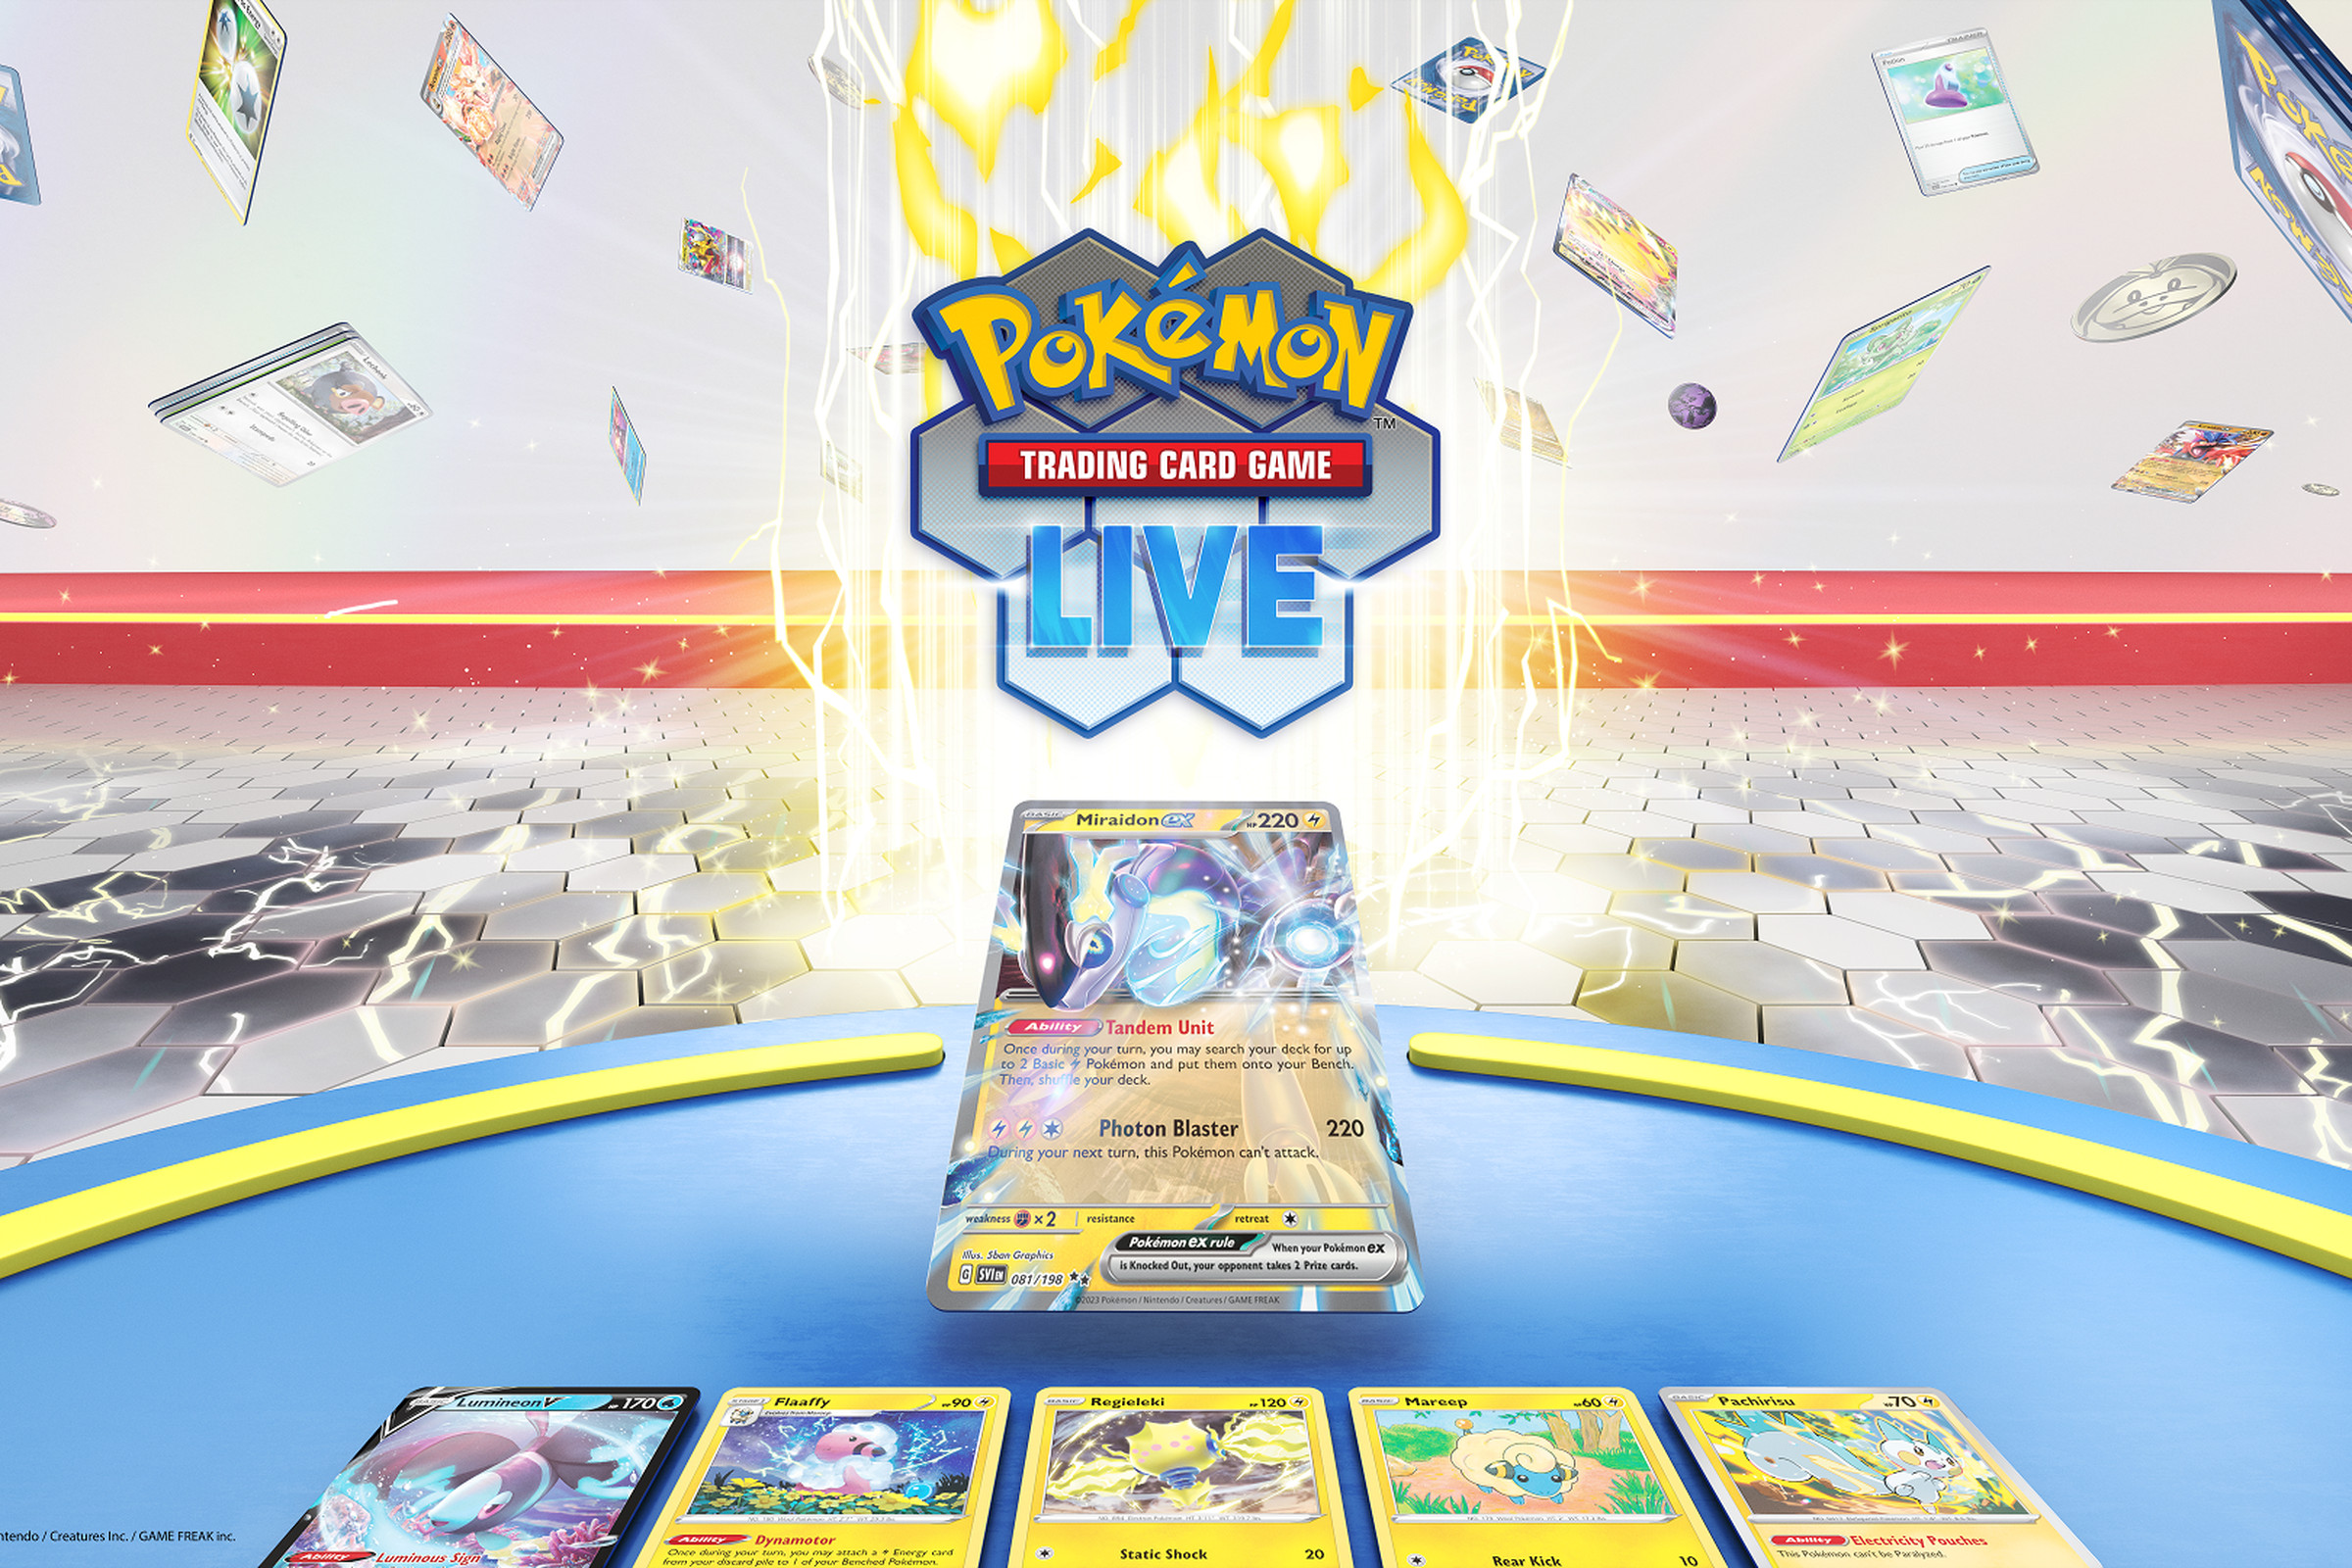 The Pokémon Trading Card Game Live app hovering above an array of Pokémon cards.